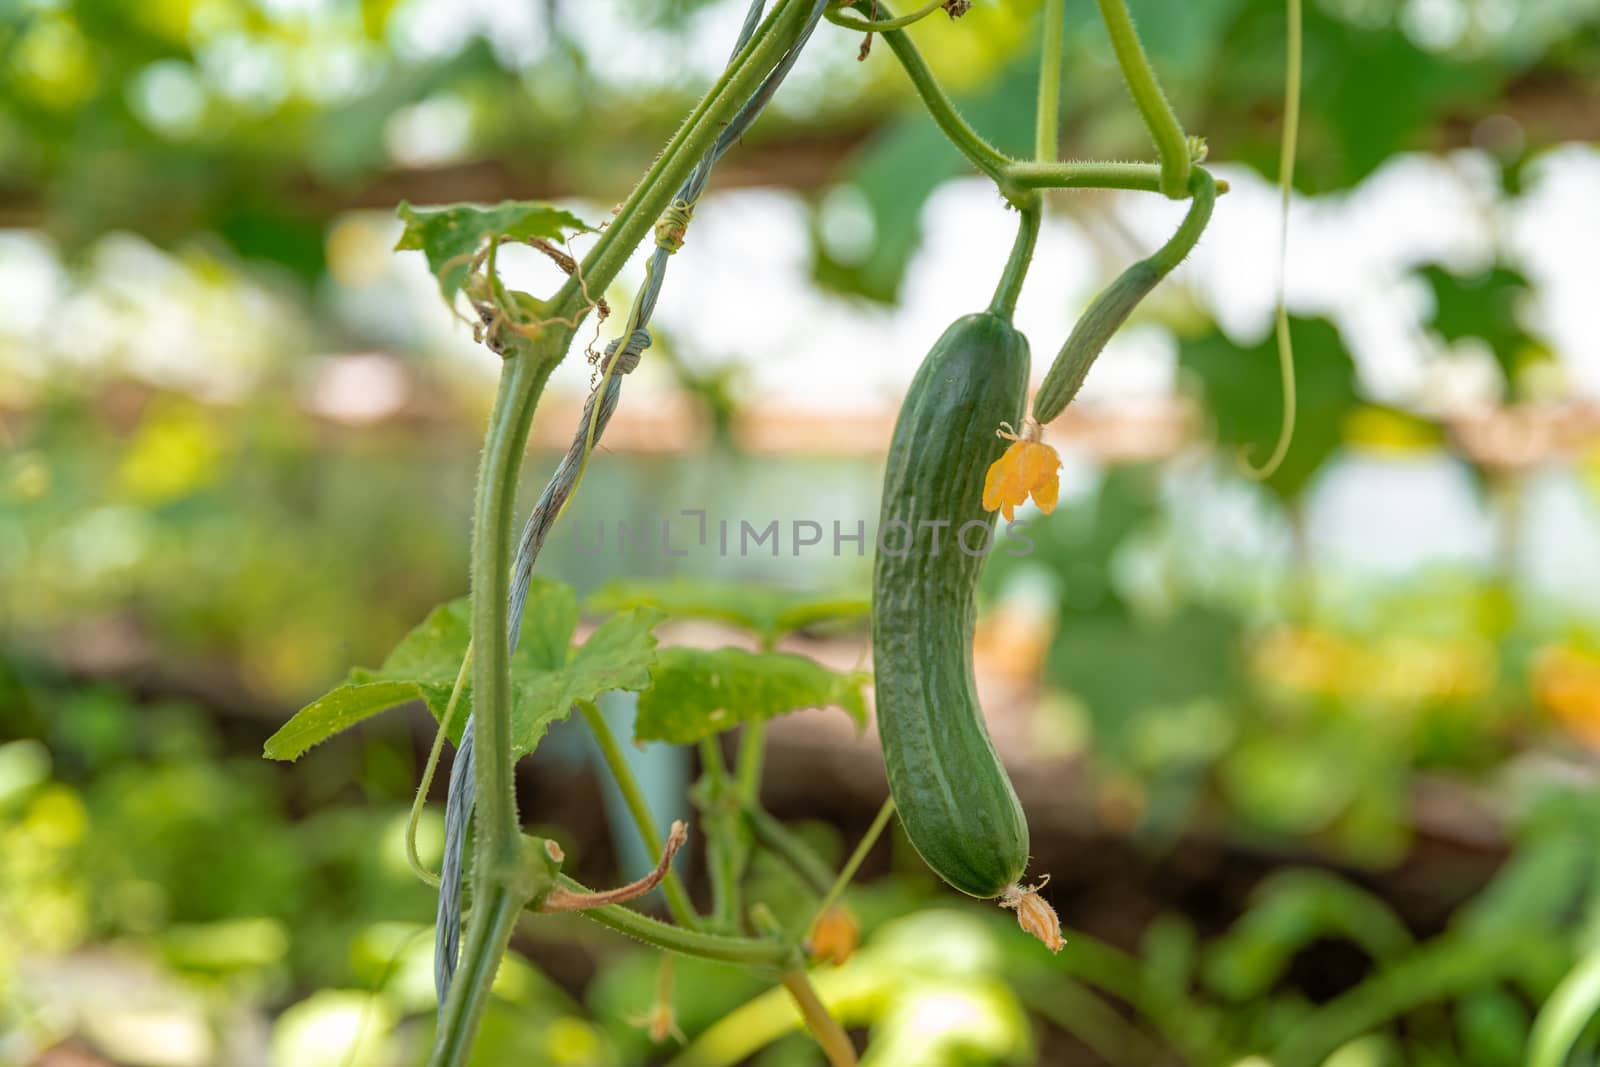 green cucumbers growing in a greenhouse on the farm, healthy vegetables without pesticide, organic product by Edophoto